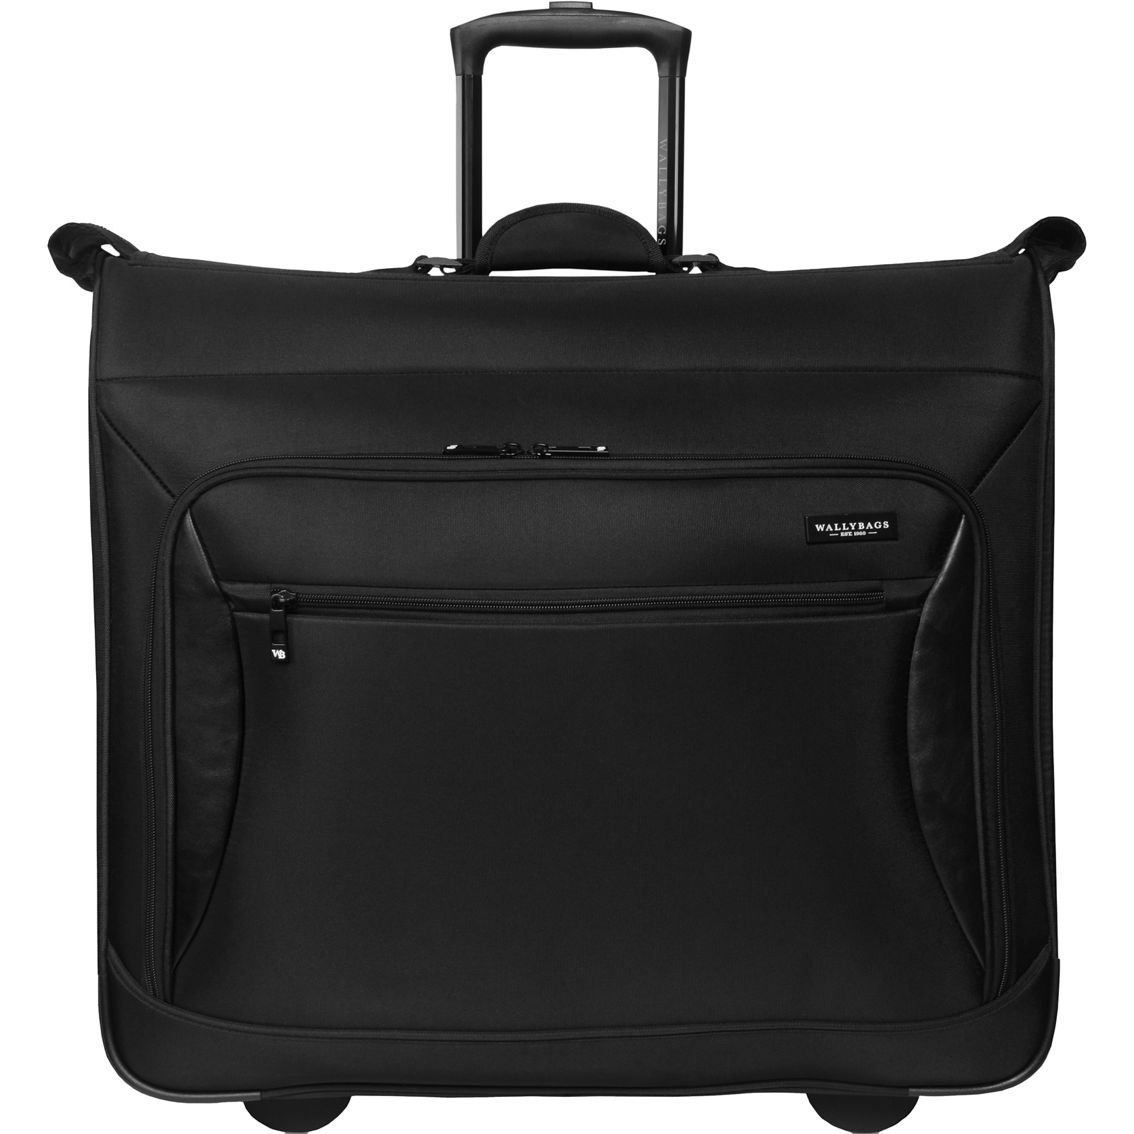 WallyBags 45 in. Premium Rolling Garment Bag with Multiple Pockets - Image 2 of 6